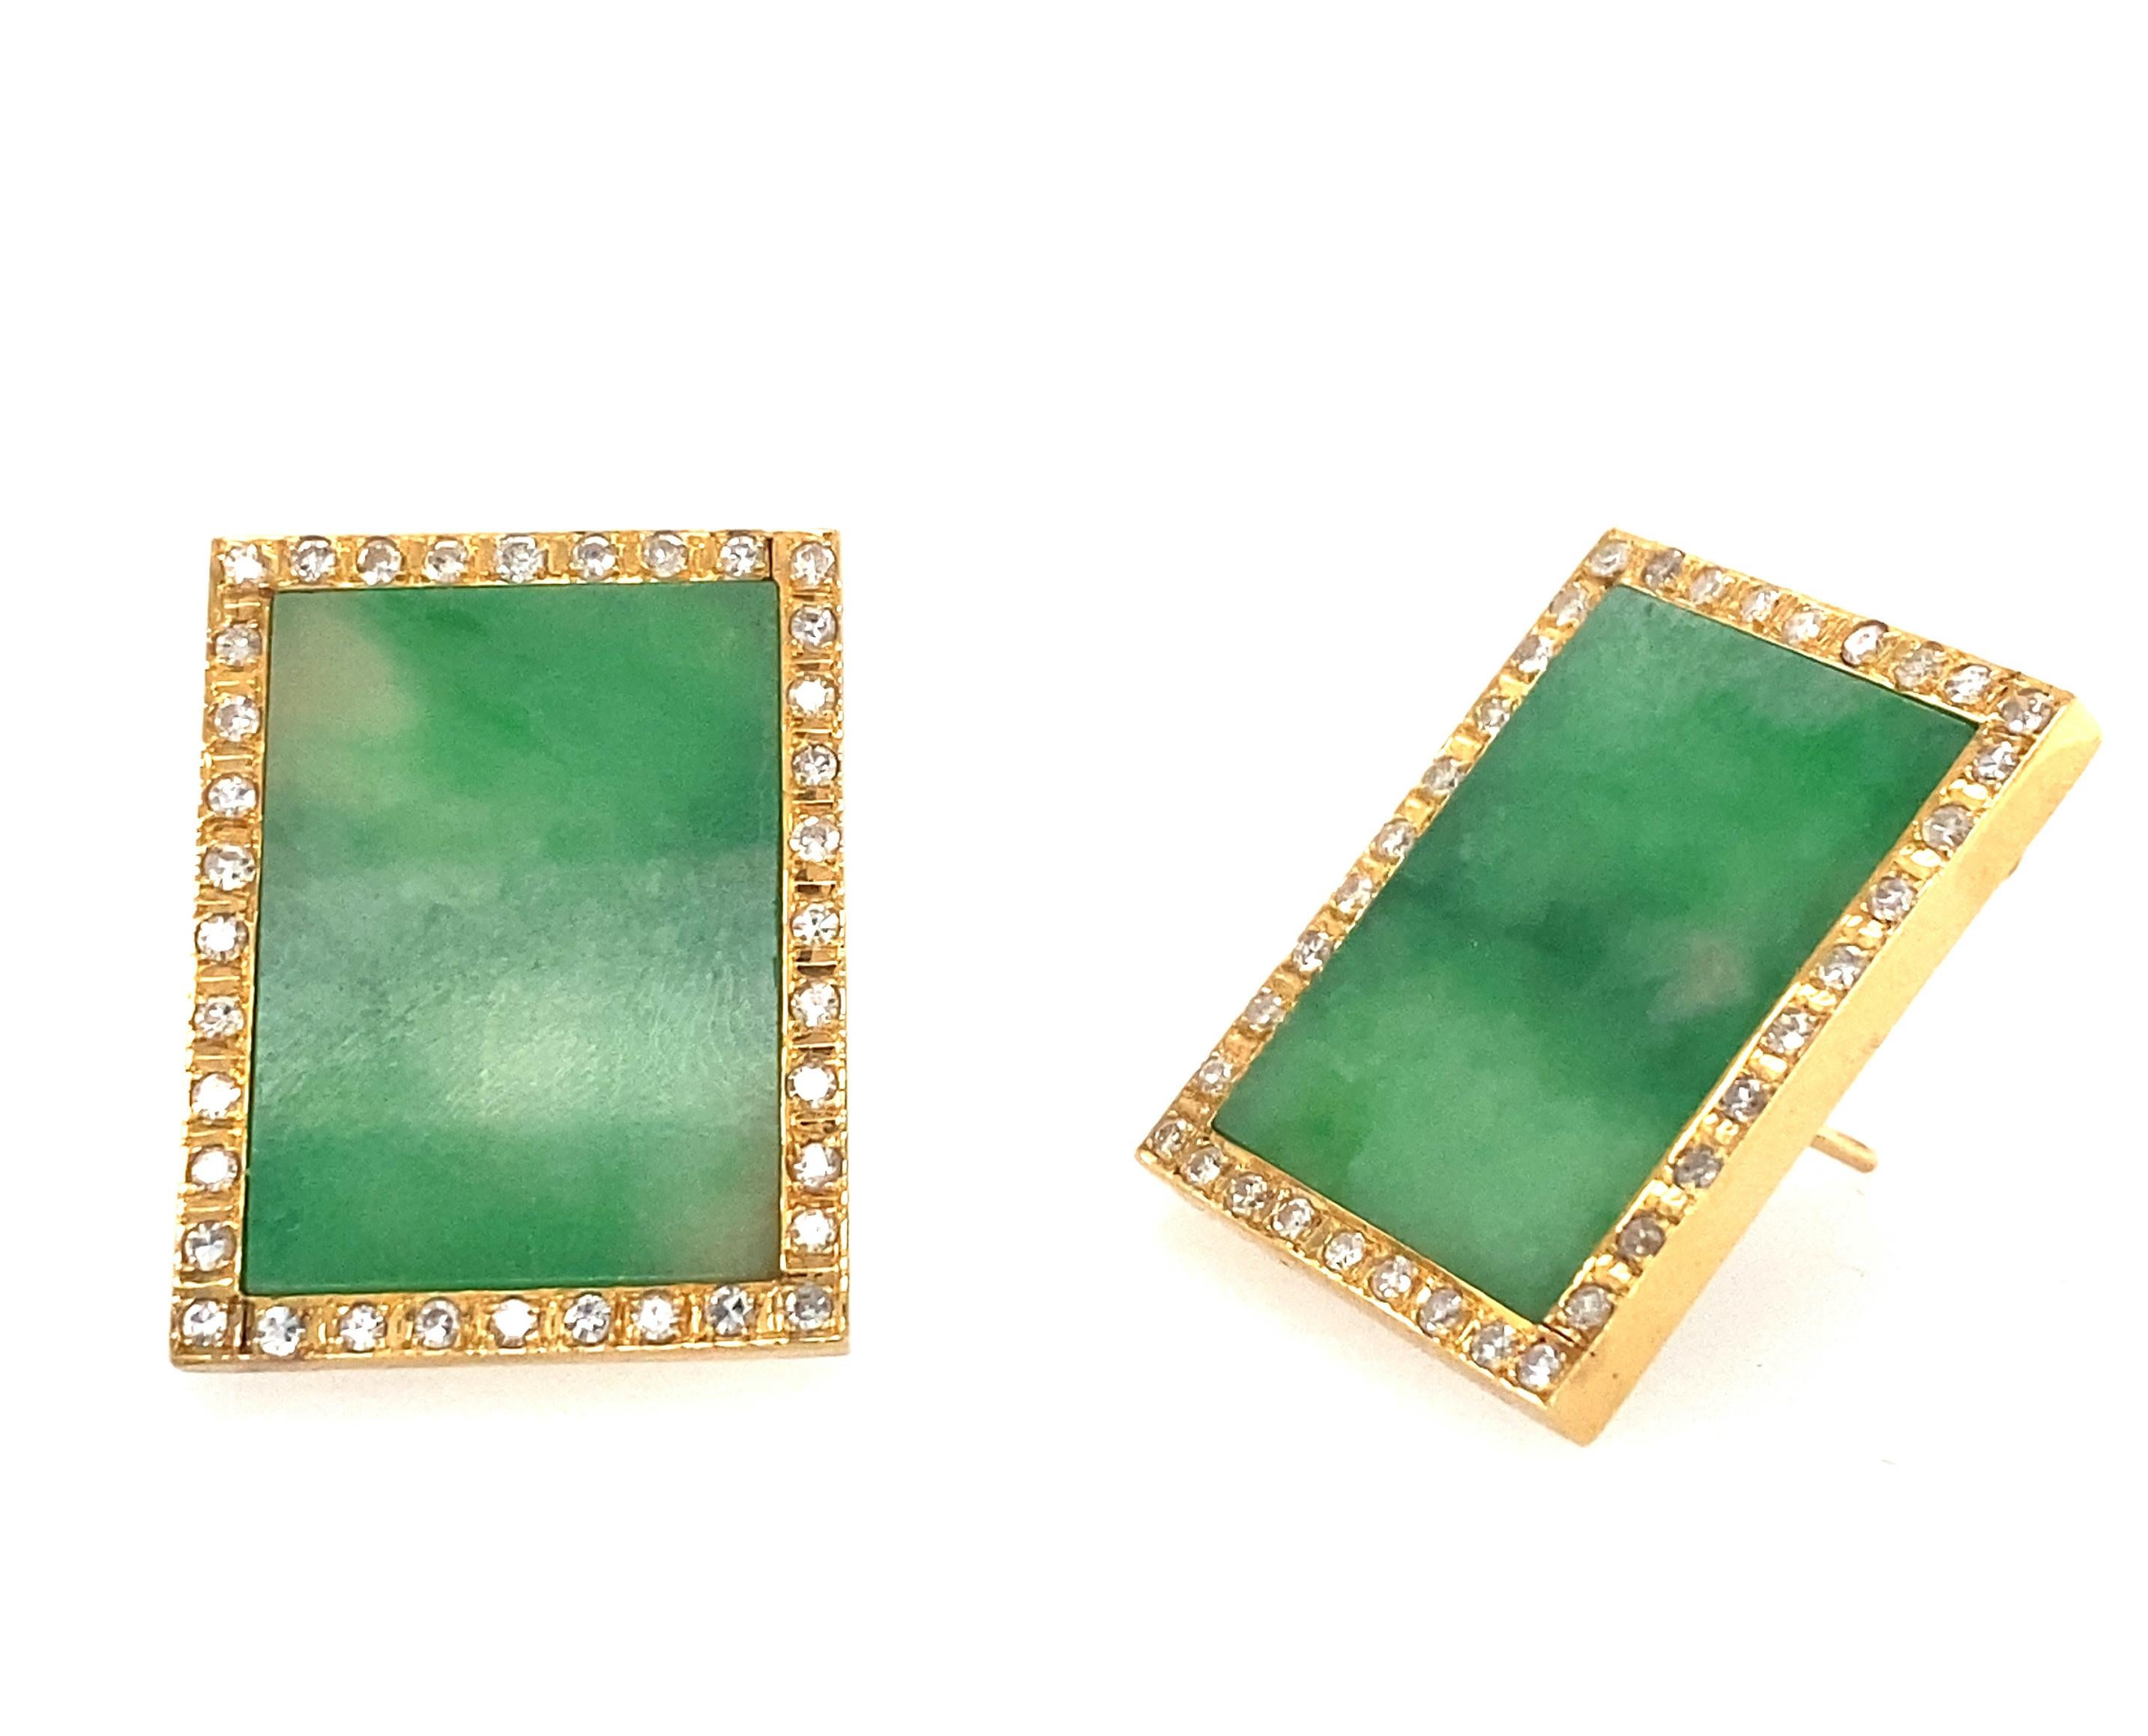 Pair of Gold, Jade and Diamond Earrings
14 kt., 2 rectangular jade plaques  ap. 22.0 x 18.0 mm., 
72 single-cut diamonds ap. 1.05 cts., 
ap. 13.6 dwts. gross. Posts and clip-backs. 1 1/8 x 7/8 inches.